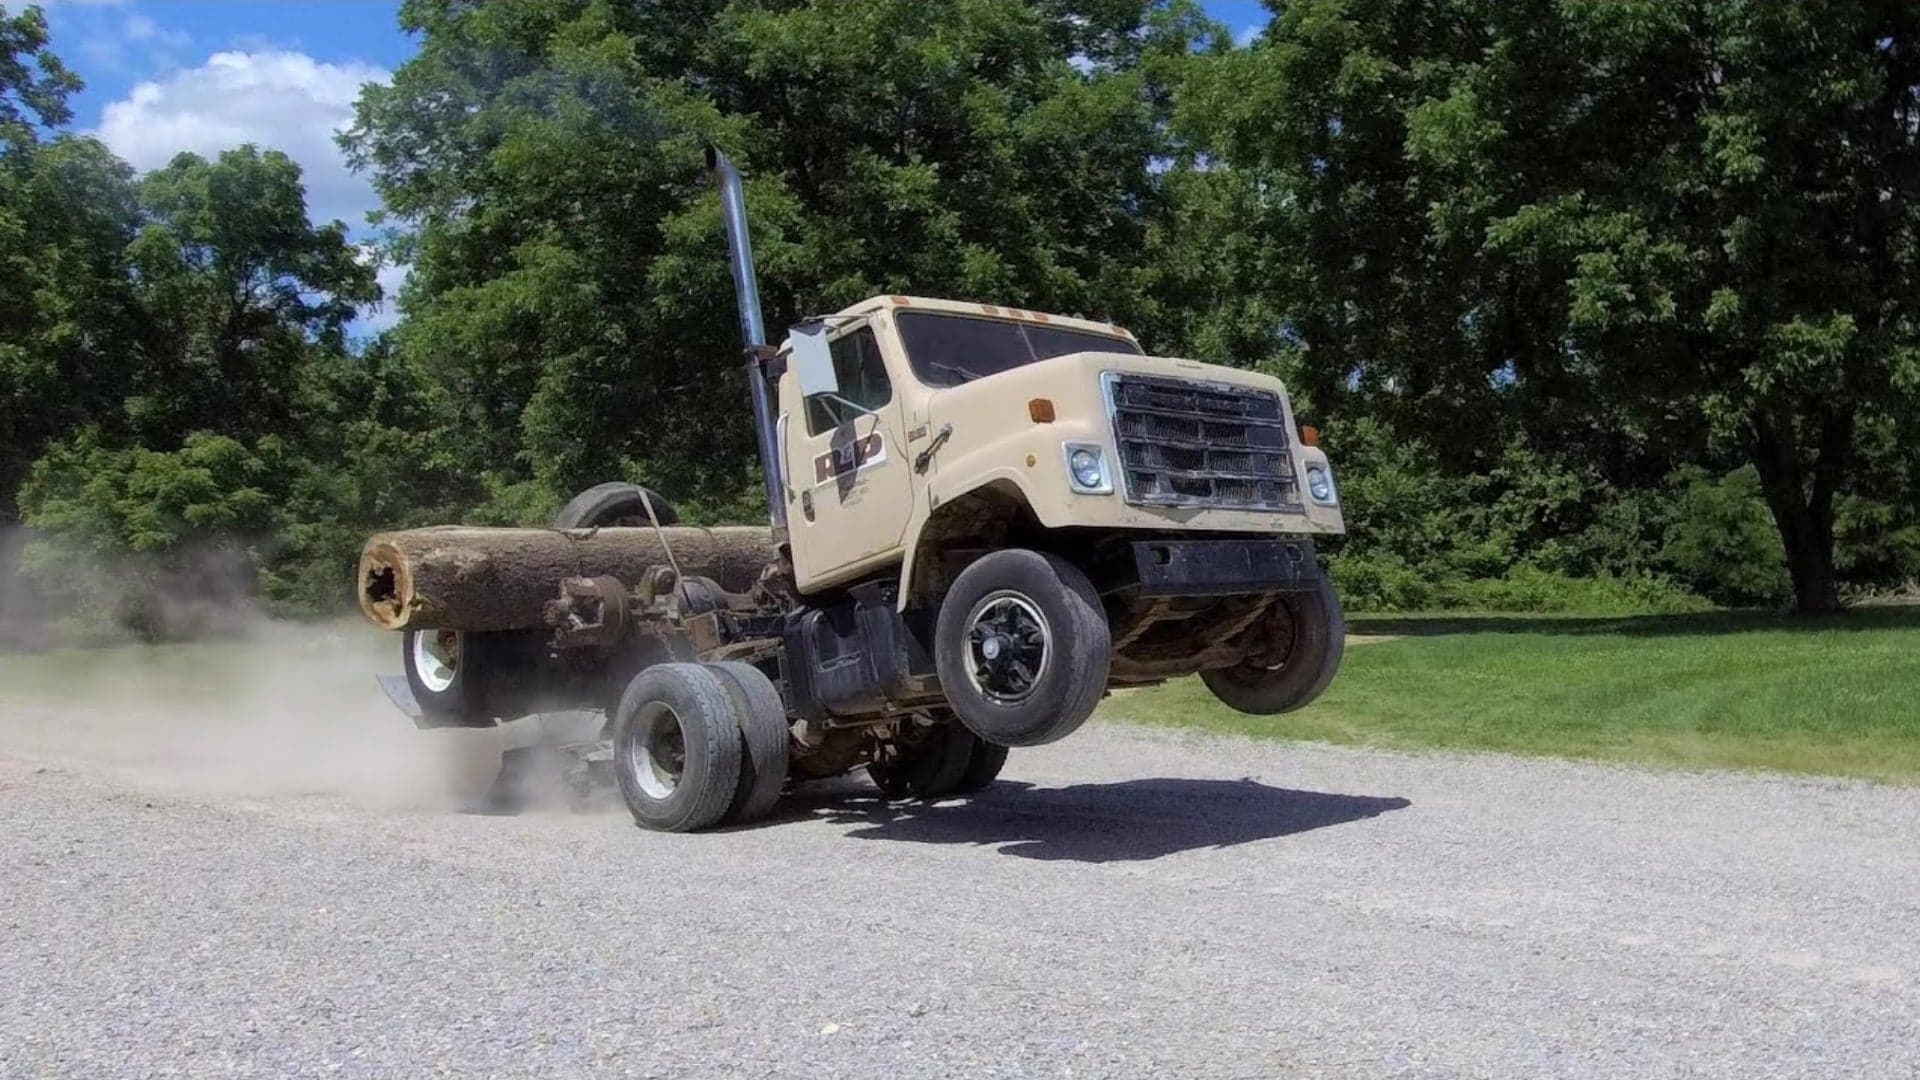 It Takes a Lot of Work to Get a Semi-Truck to Do Wheelies, But This Guy Did